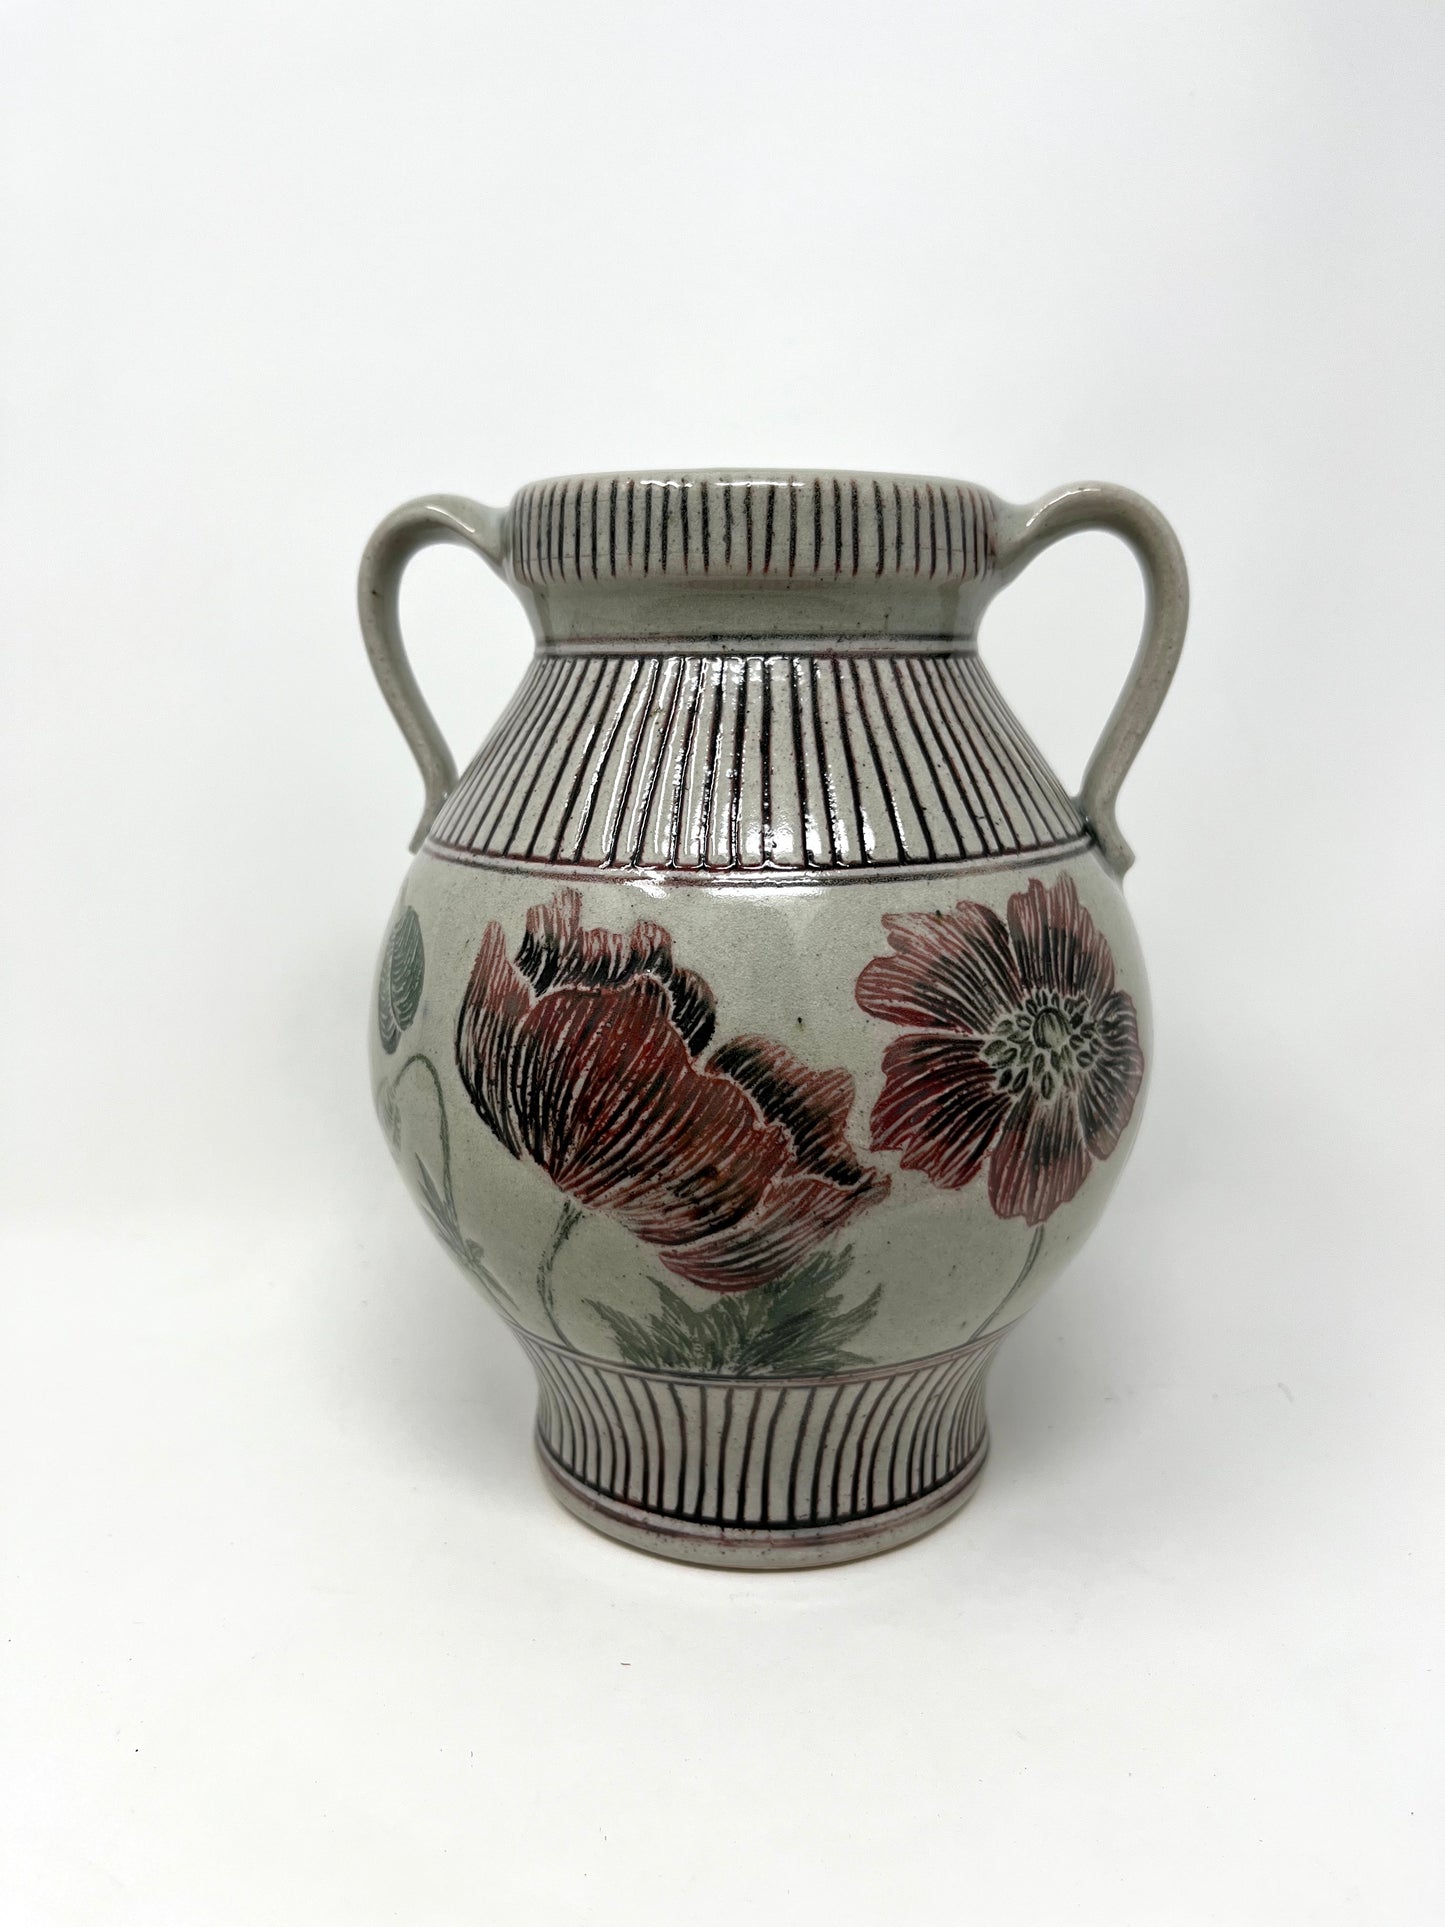 Carved Poppy Vase with Handles